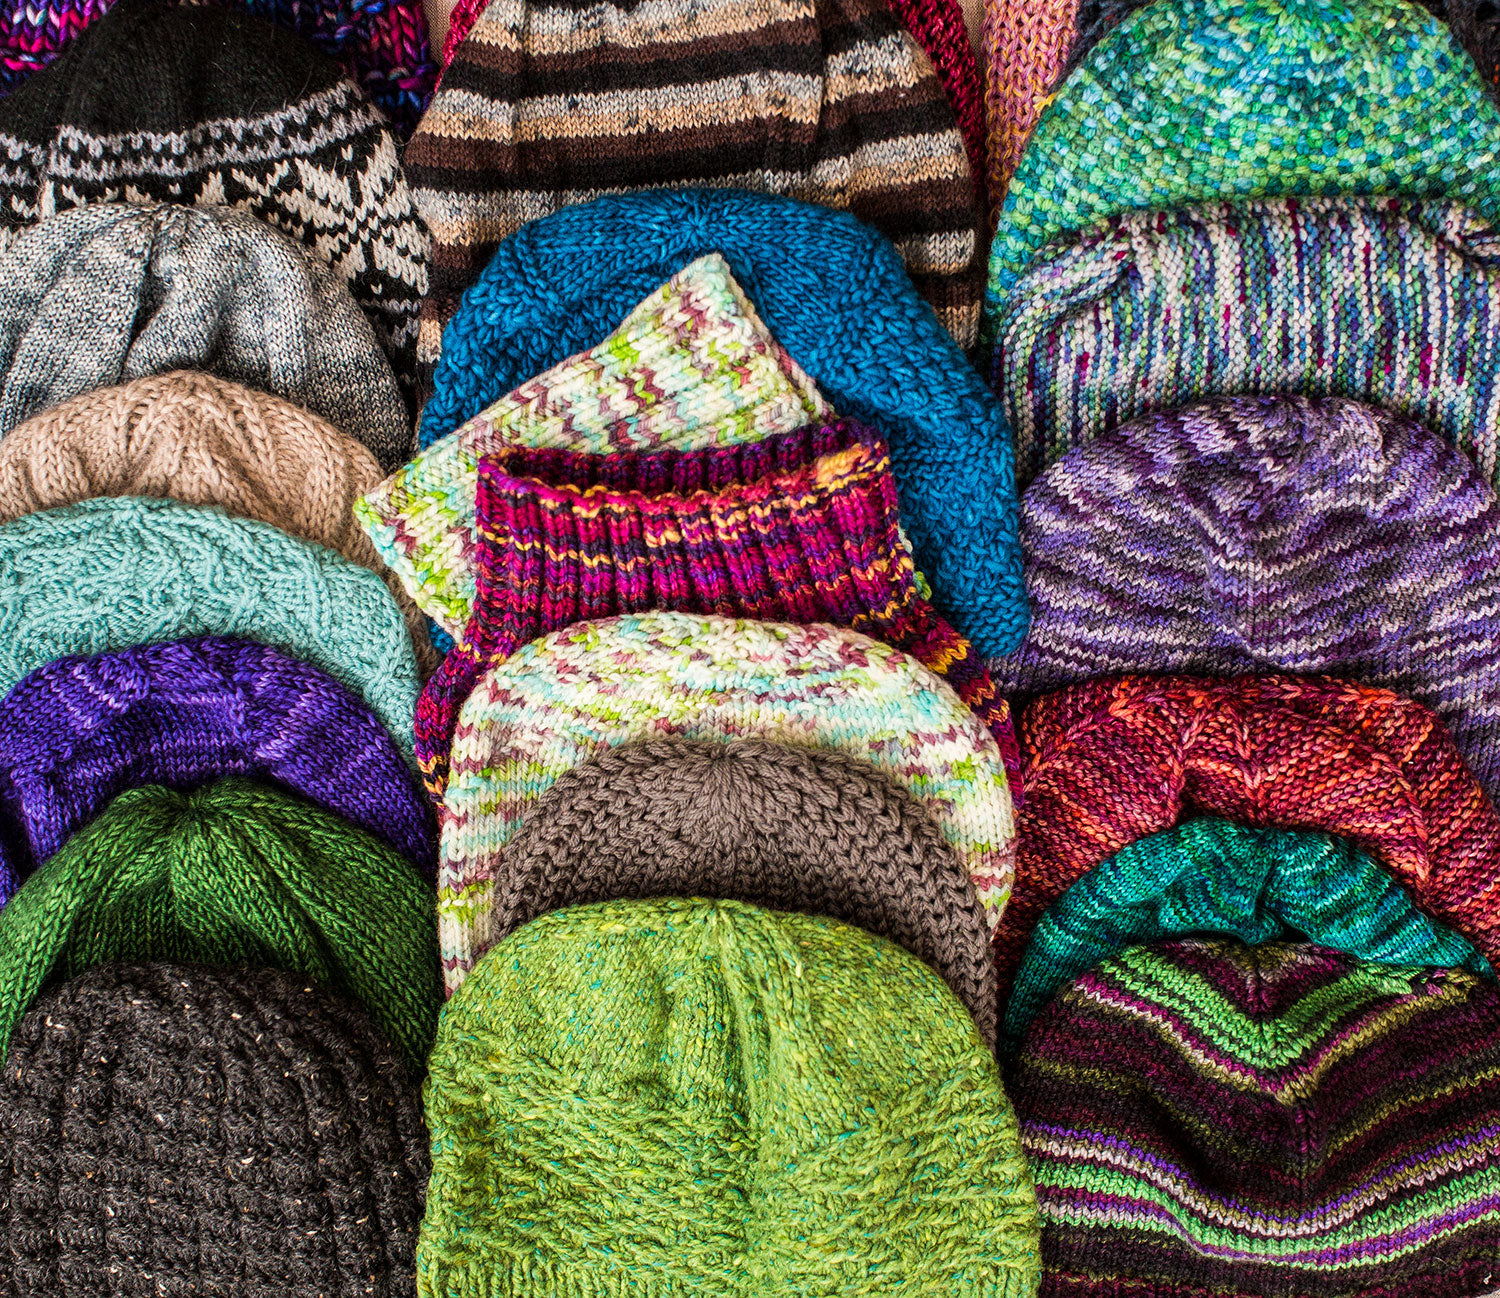 Hats knitted by the TOM BIHN Ravelry group for the TOM BIHN Crew